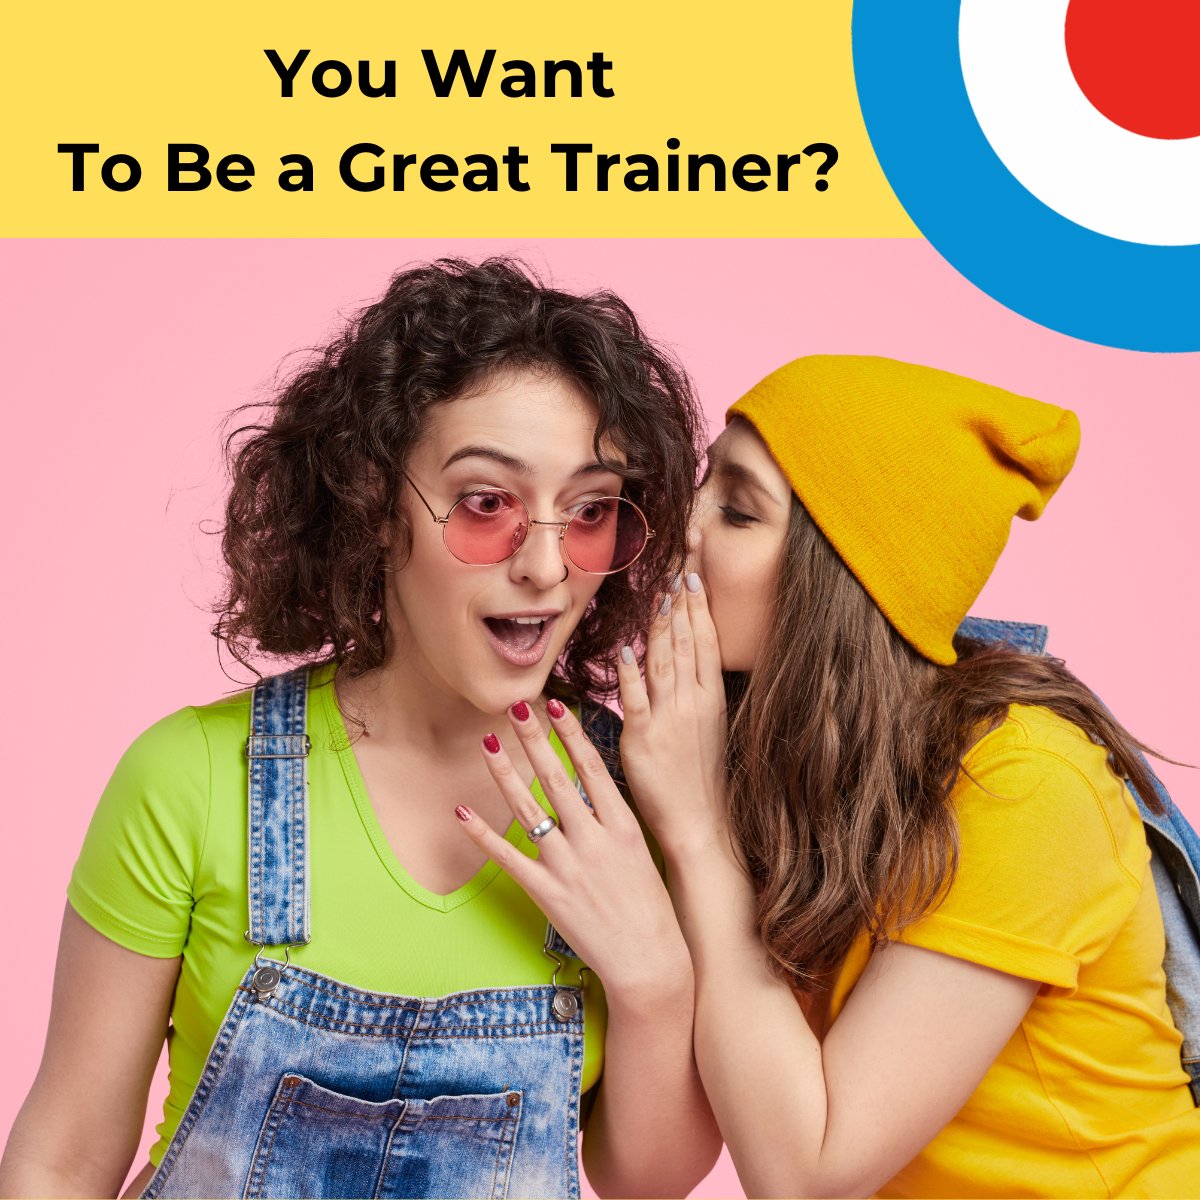 Shared by @TargetTrgAssoc: I've learnt so much over my 30 years delivering training, but there are a few things no one ever taught me... ow.ly/Wq0b50OsZrM #training #learning #publicspeaking #trainers